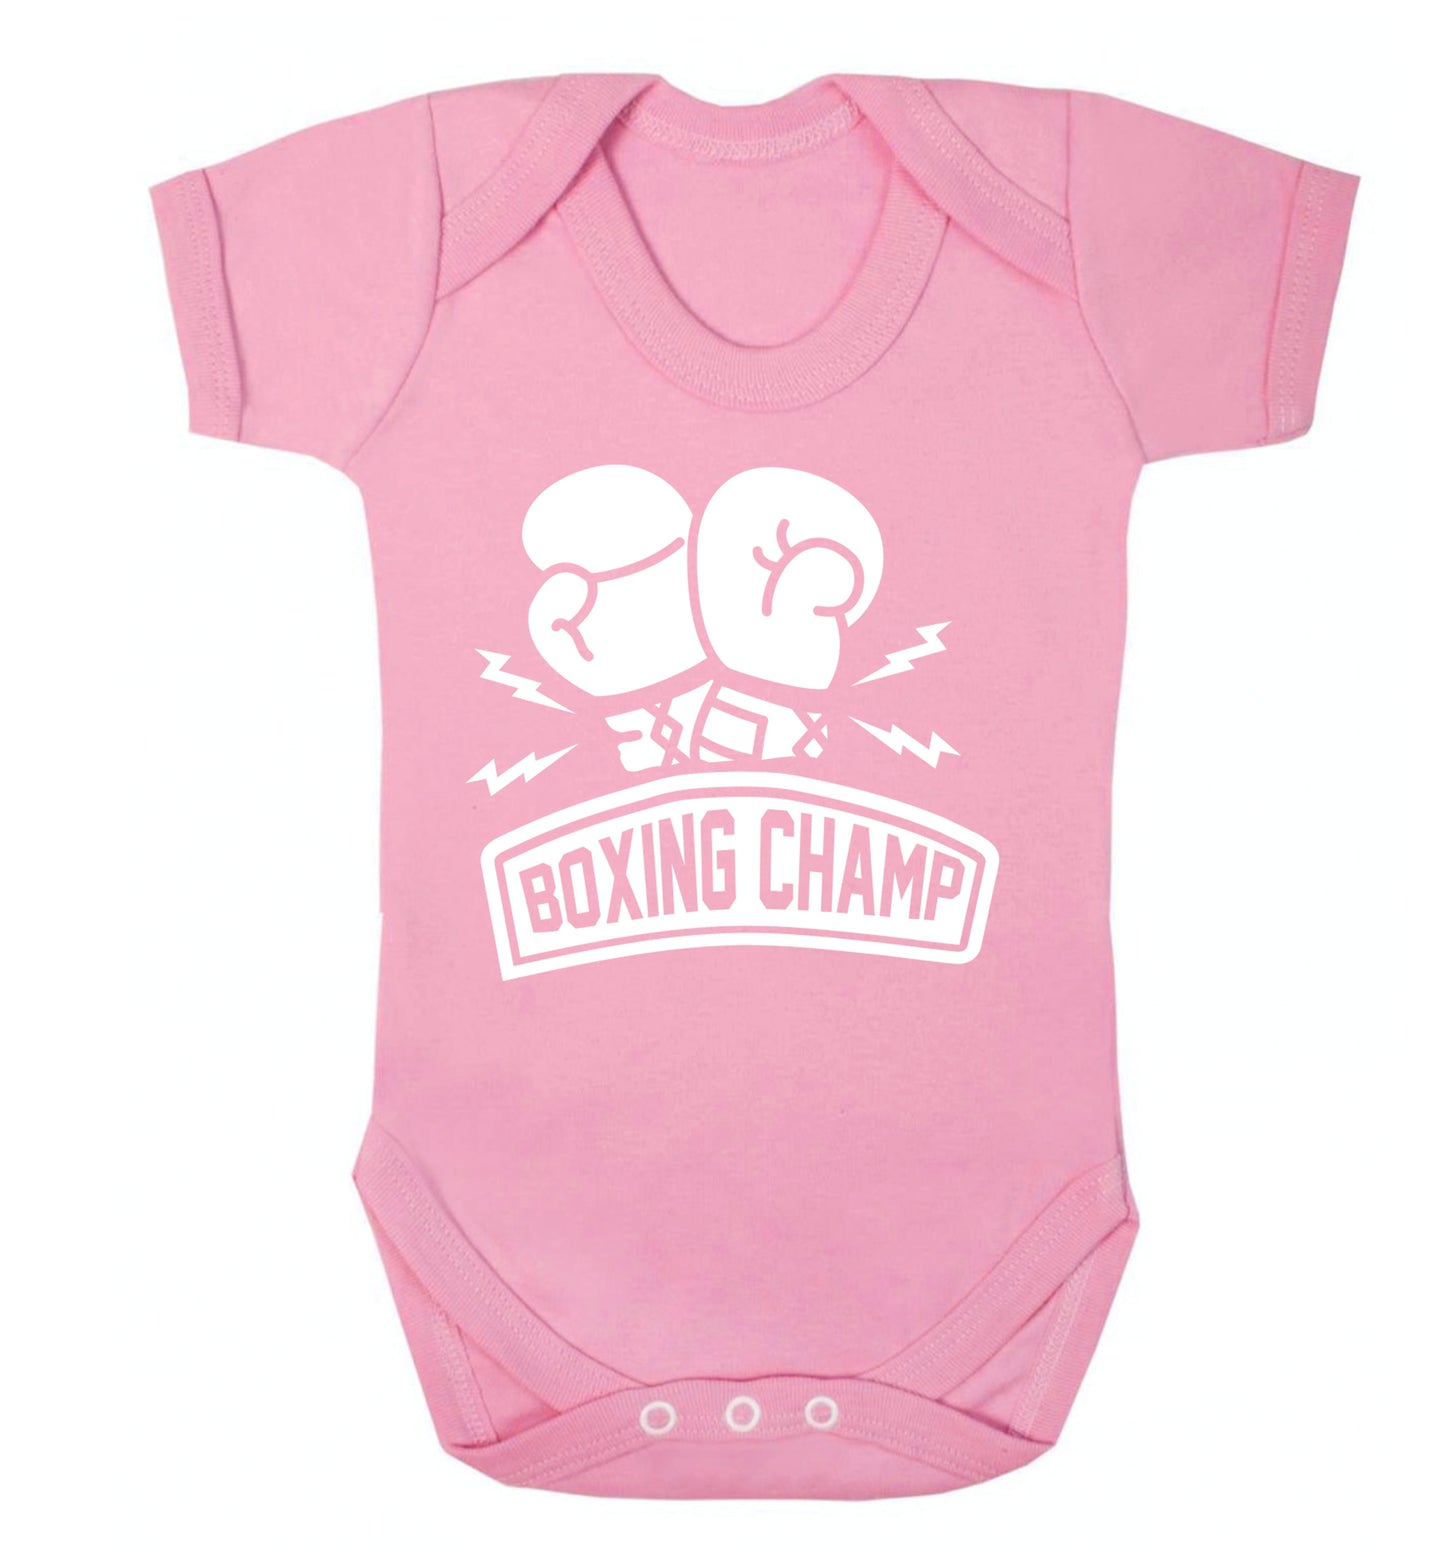 Boxing Champ Baby Vest pale pink 18-24 months